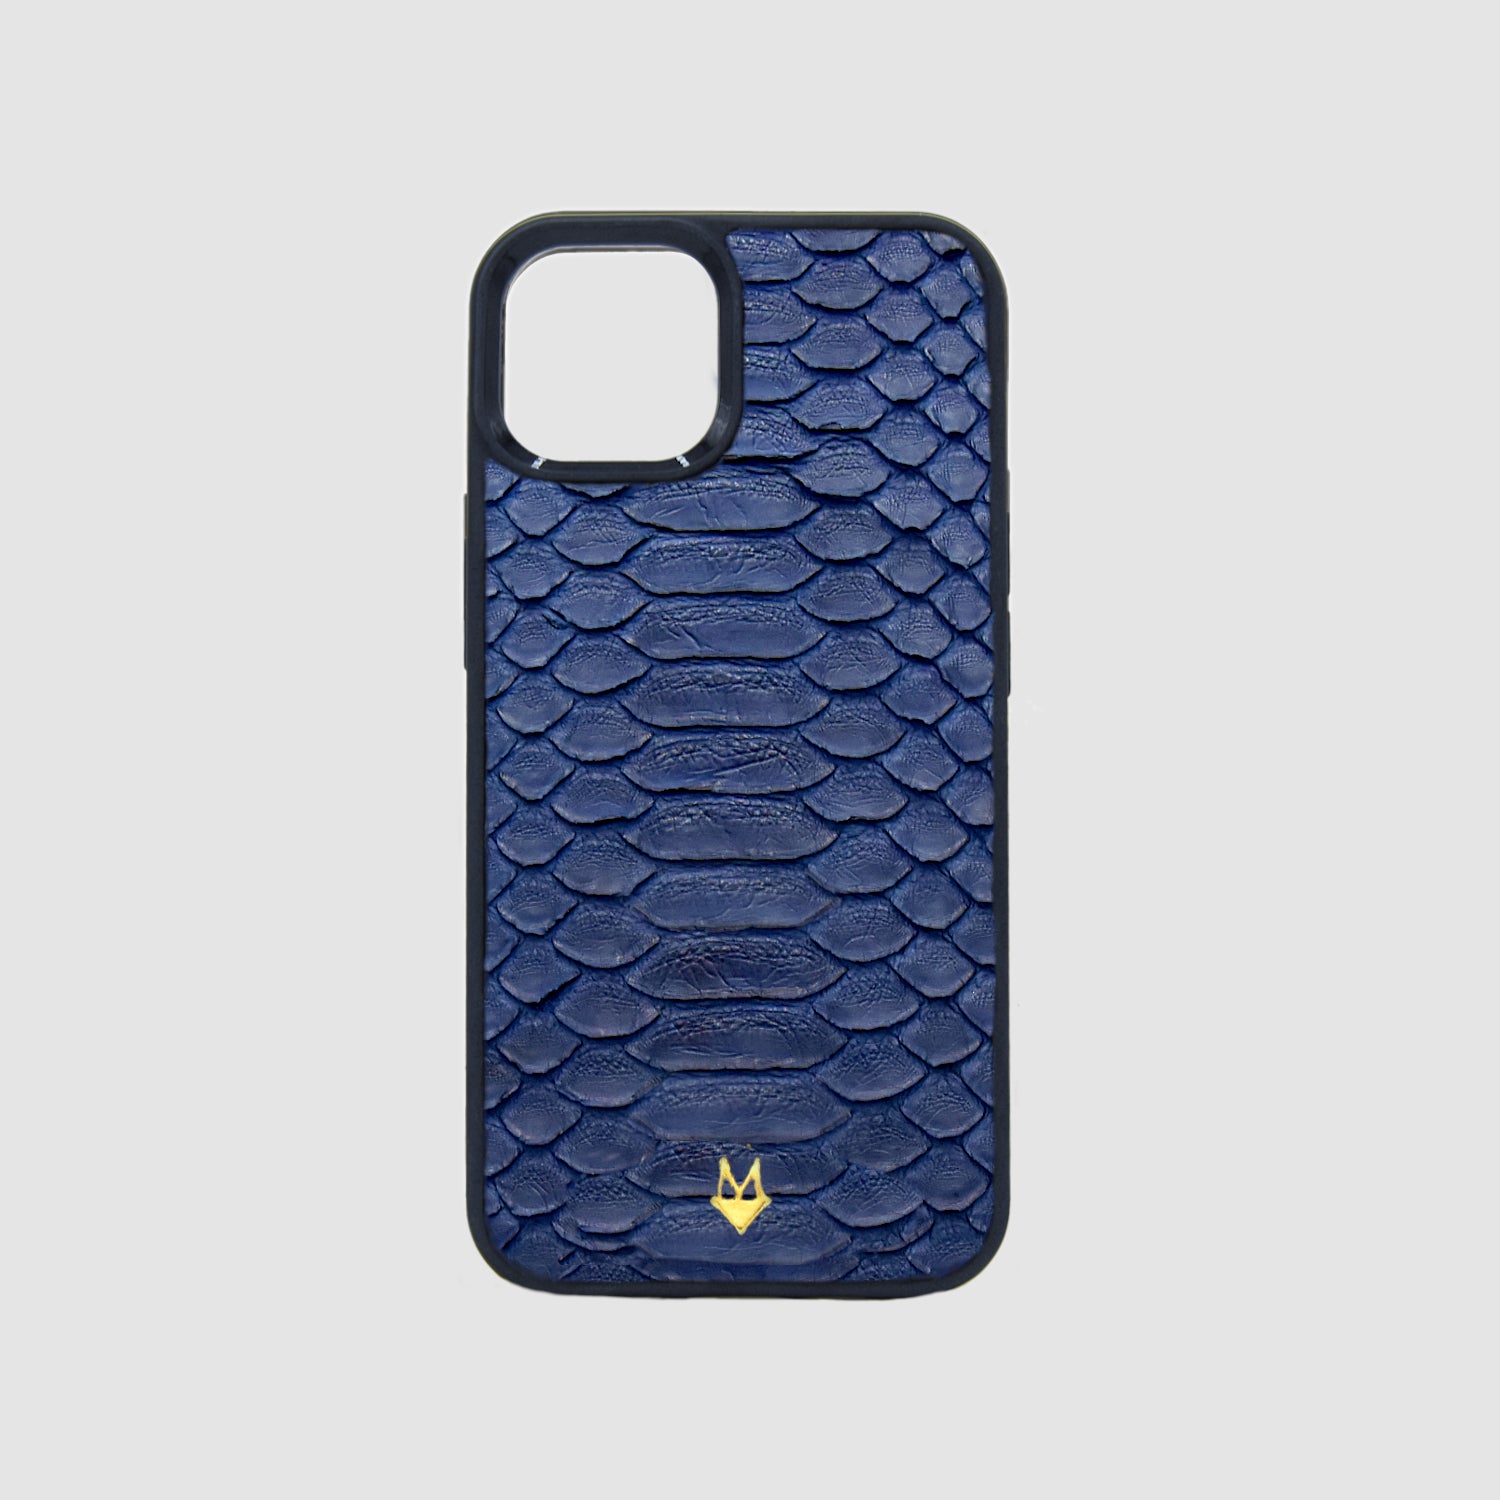 iPhone XR Case made of Plastic & Leather: order yours online